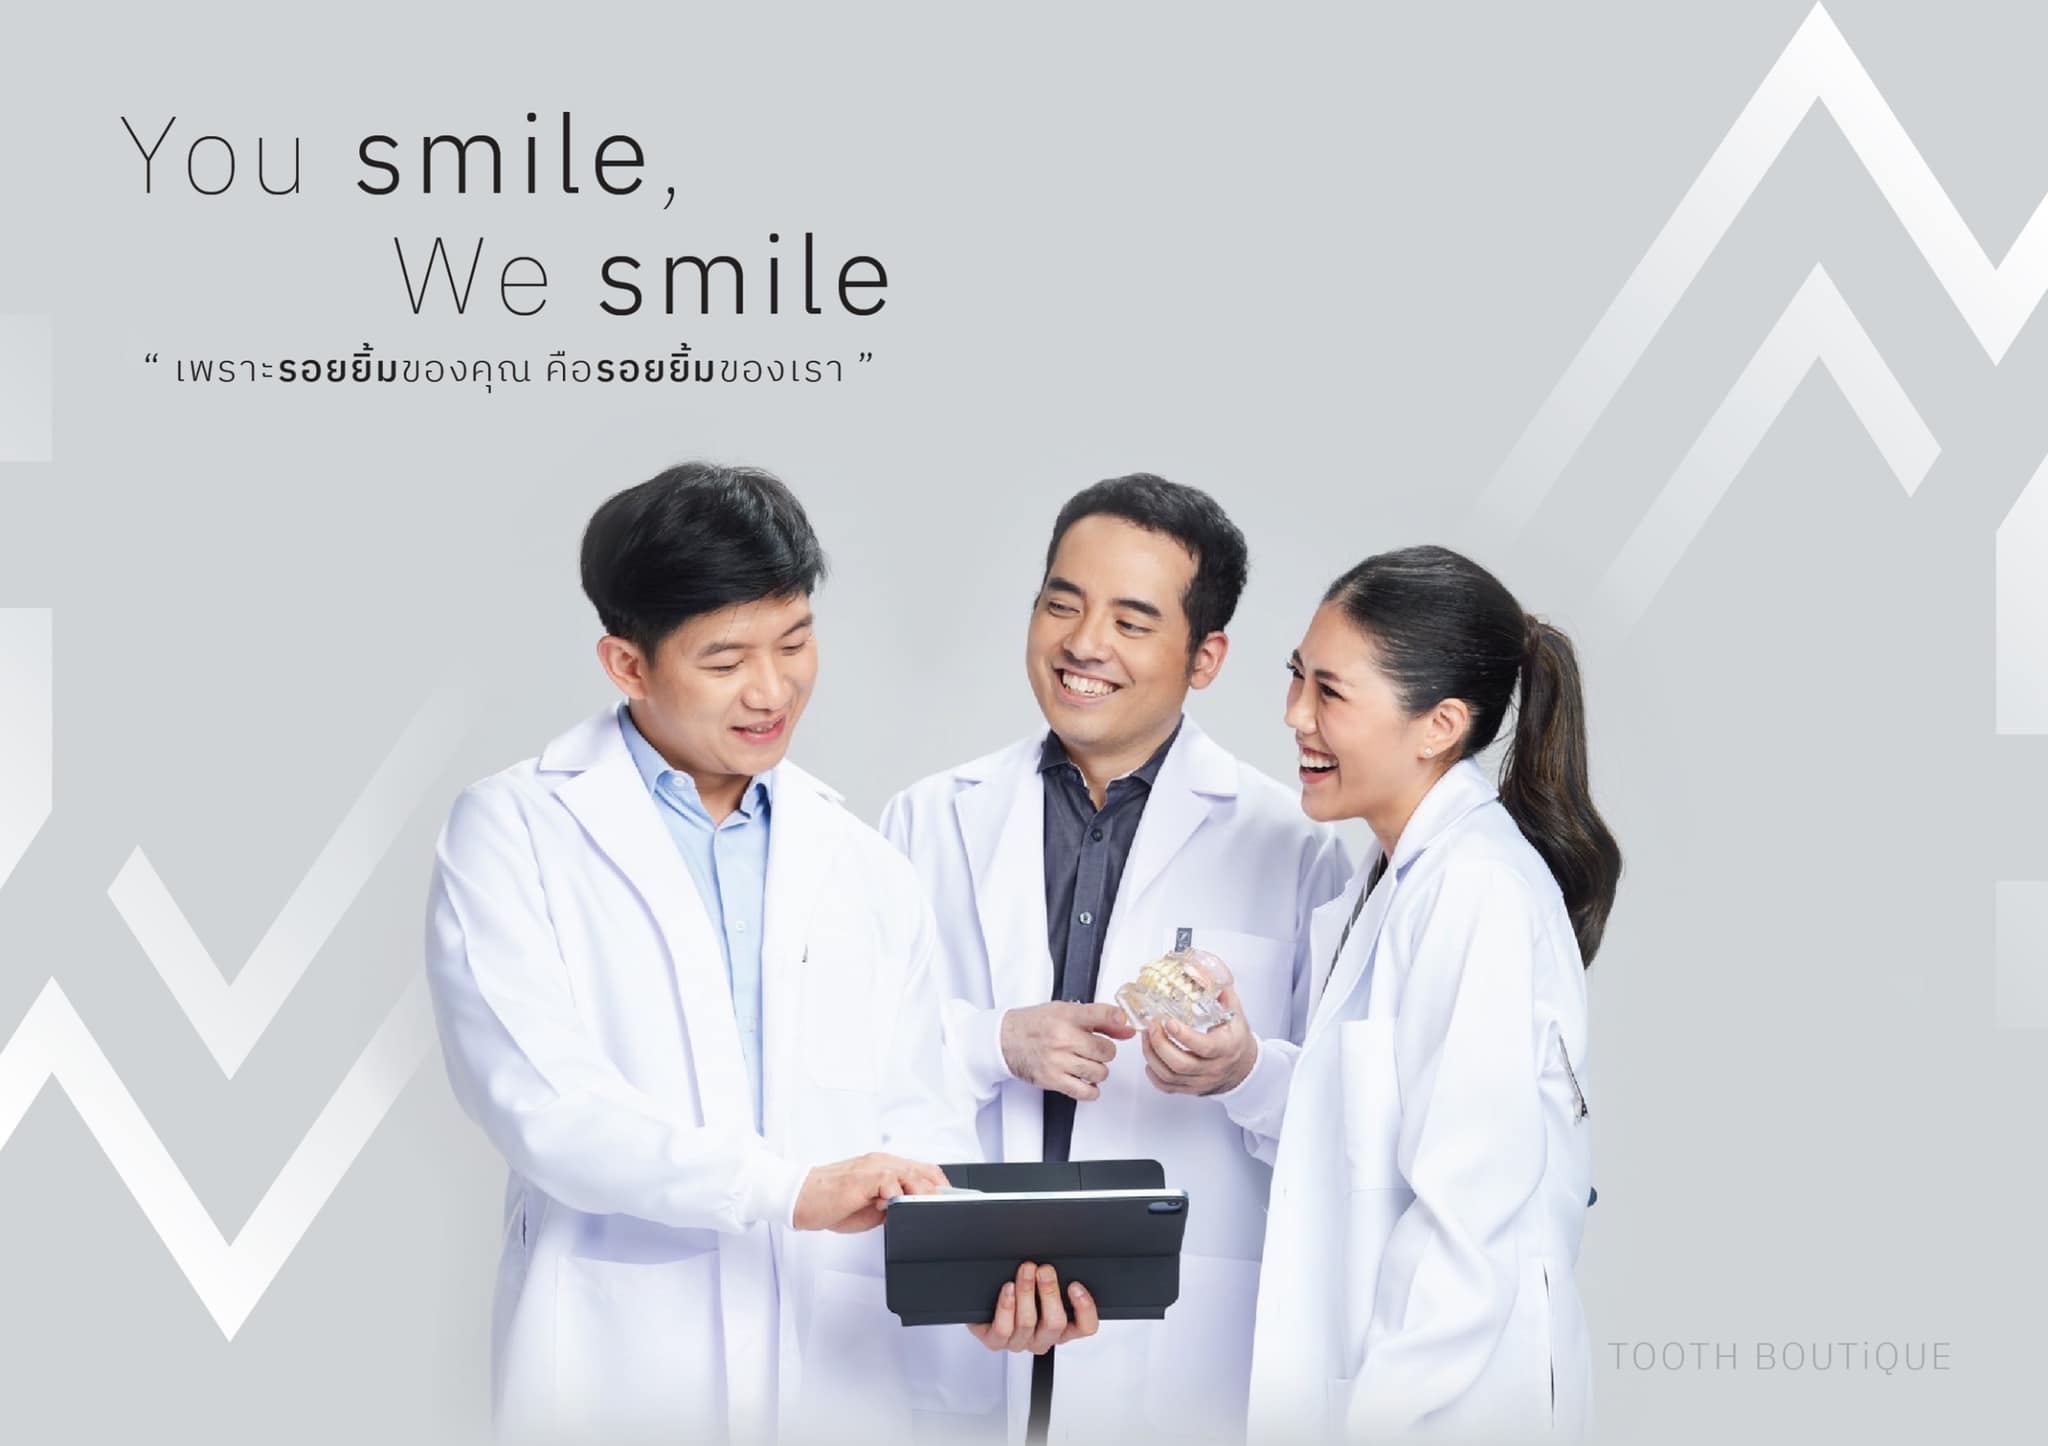 Tooth boutique ( International dental clinic )